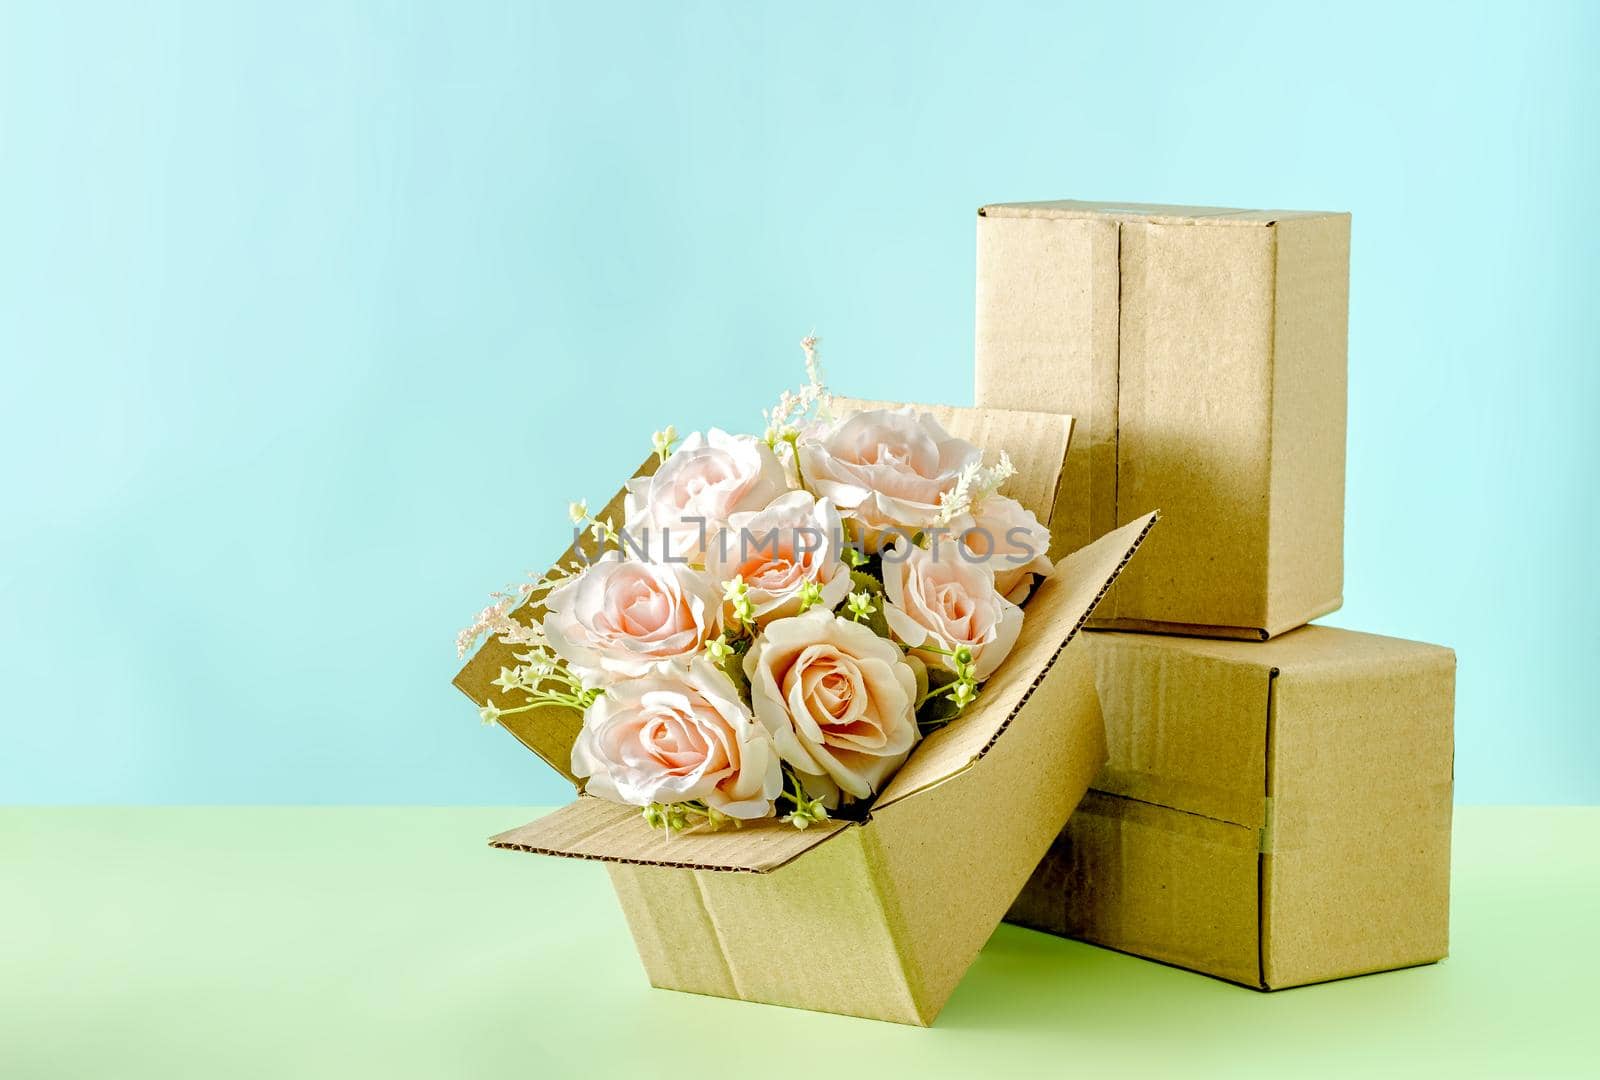 A blooming bouquet of pink roses in a cardboard box of a delivery service for congratulations on Valentine's Day or a wedding or other holiday.